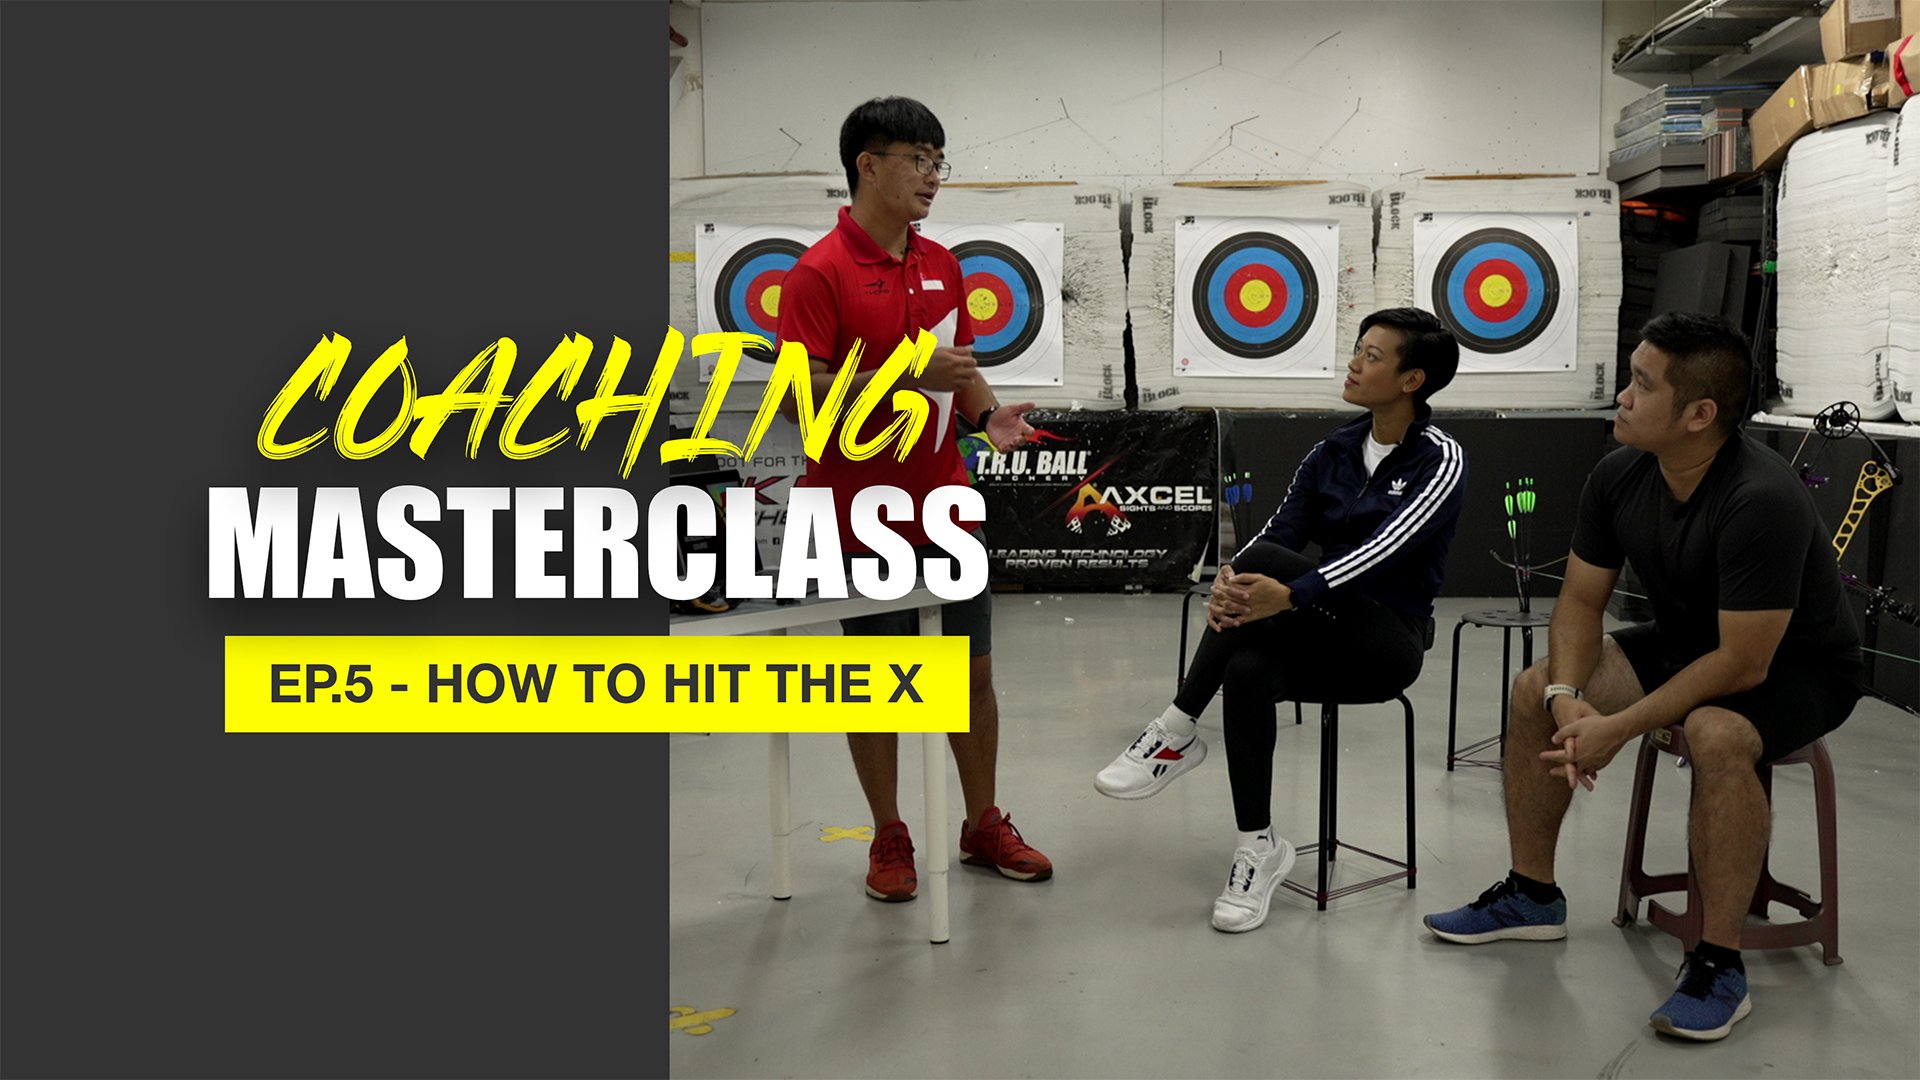 Coaching Masterclass (Archery) Ep 5 - How to hit the X